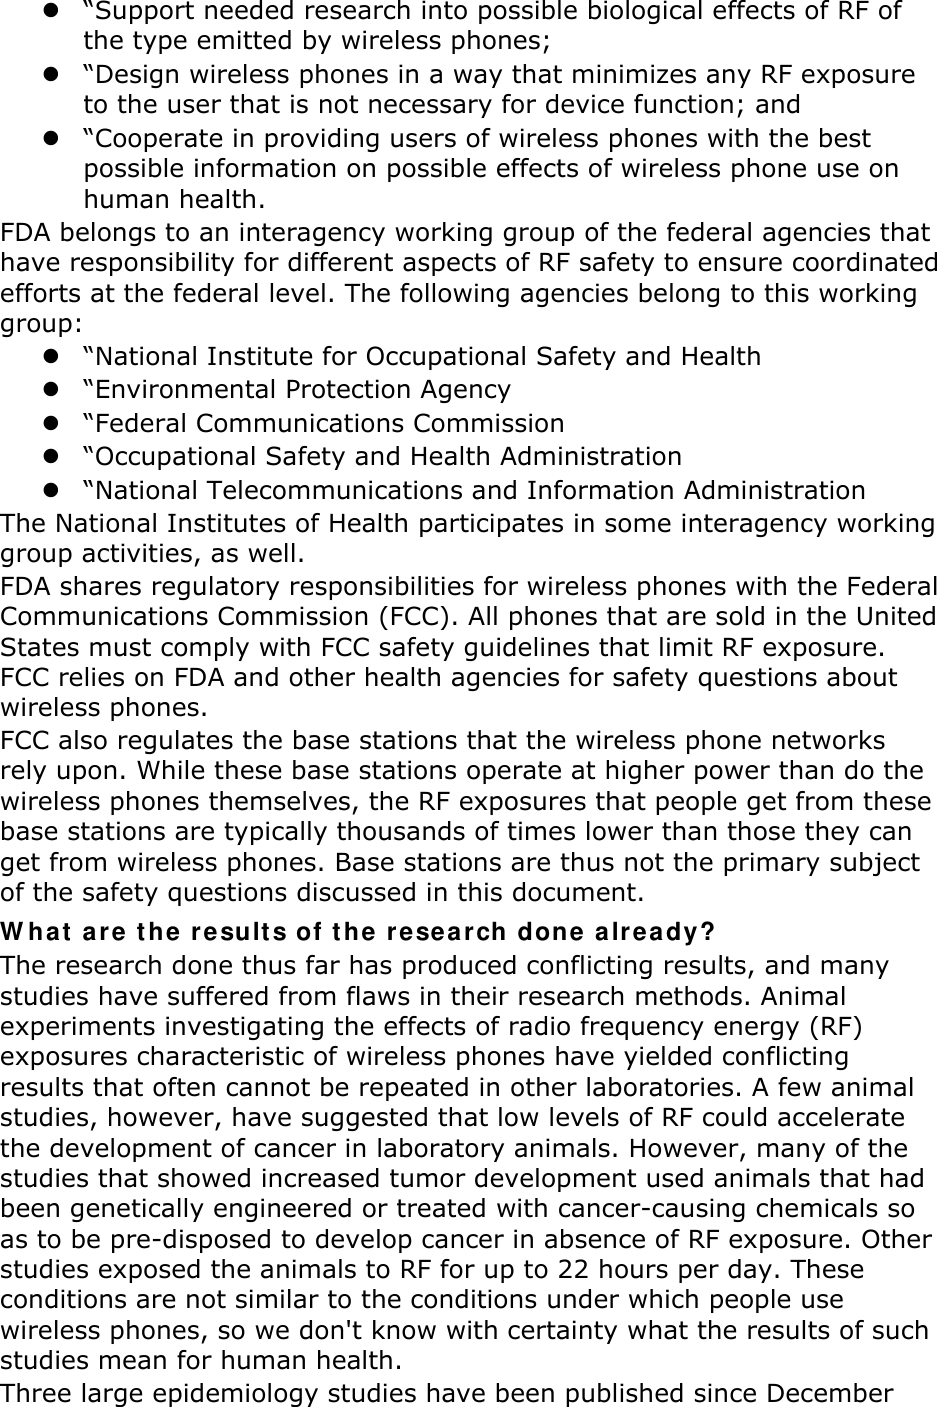  “Support needed research into possible biological effects of RF of the type emitted by wireless phones;  “Design wireless phones in a way that minimizes any RF exposure to the user that is not necessary for device function; and  “Cooperate in providing users of wireless phones with the best possible information on possible effects of wireless phone use on human health. FDA belongs to an interagency working group of the federal agencies that have responsibility for different aspects of RF safety to ensure coordinated efforts at the federal level. The following agencies belong to this working group:  “National Institute for Occupational Safety and Health  “Environmental Protection Agency  “Federal Communications Commission  “Occupational Safety and Health Administration  “National Telecommunications and Information Administration The National Institutes of Health participates in some interagency working group activities, as well. FDA shares regulatory responsibilities for wireless phones with the Federal Communications Commission (FCC). All phones that are sold in the United States must comply with FCC safety guidelines that limit RF exposure. FCC relies on FDA and other health agencies for safety questions about wireless phones. FCC also regulates the base stations that the wireless phone networks rely upon. While these base stations operate at higher power than do the wireless phones themselves, the RF exposures that people get from these base stations are typically thousands of times lower than those they can get from wireless phones. Base stations are thus not the primary subject of the safety questions discussed in this document. W hat  a re  t he re sults of t he re search done a lready? The research done thus far has produced conflicting results, and many studies have suffered from flaws in their research methods. Animal experiments investigating the effects of radio frequency energy (RF) exposures characteristic of wireless phones have yielded conflicting results that often cannot be repeated in other laboratories. A few animal studies, however, have suggested that low levels of RF could accelerate the development of cancer in laboratory animals. However, many of the studies that showed increased tumor development used animals that had been genetically engineered or treated with cancer-causing chemicals so as to be pre-disposed to develop cancer in absence of RF exposure. Other studies exposed the animals to RF for up to 22 hours per day. These conditions are not similar to the conditions under which people use wireless phones, so we don&apos;t know with certainty what the results of such studies mean for human health. Three large epidemiology studies have been published since December 